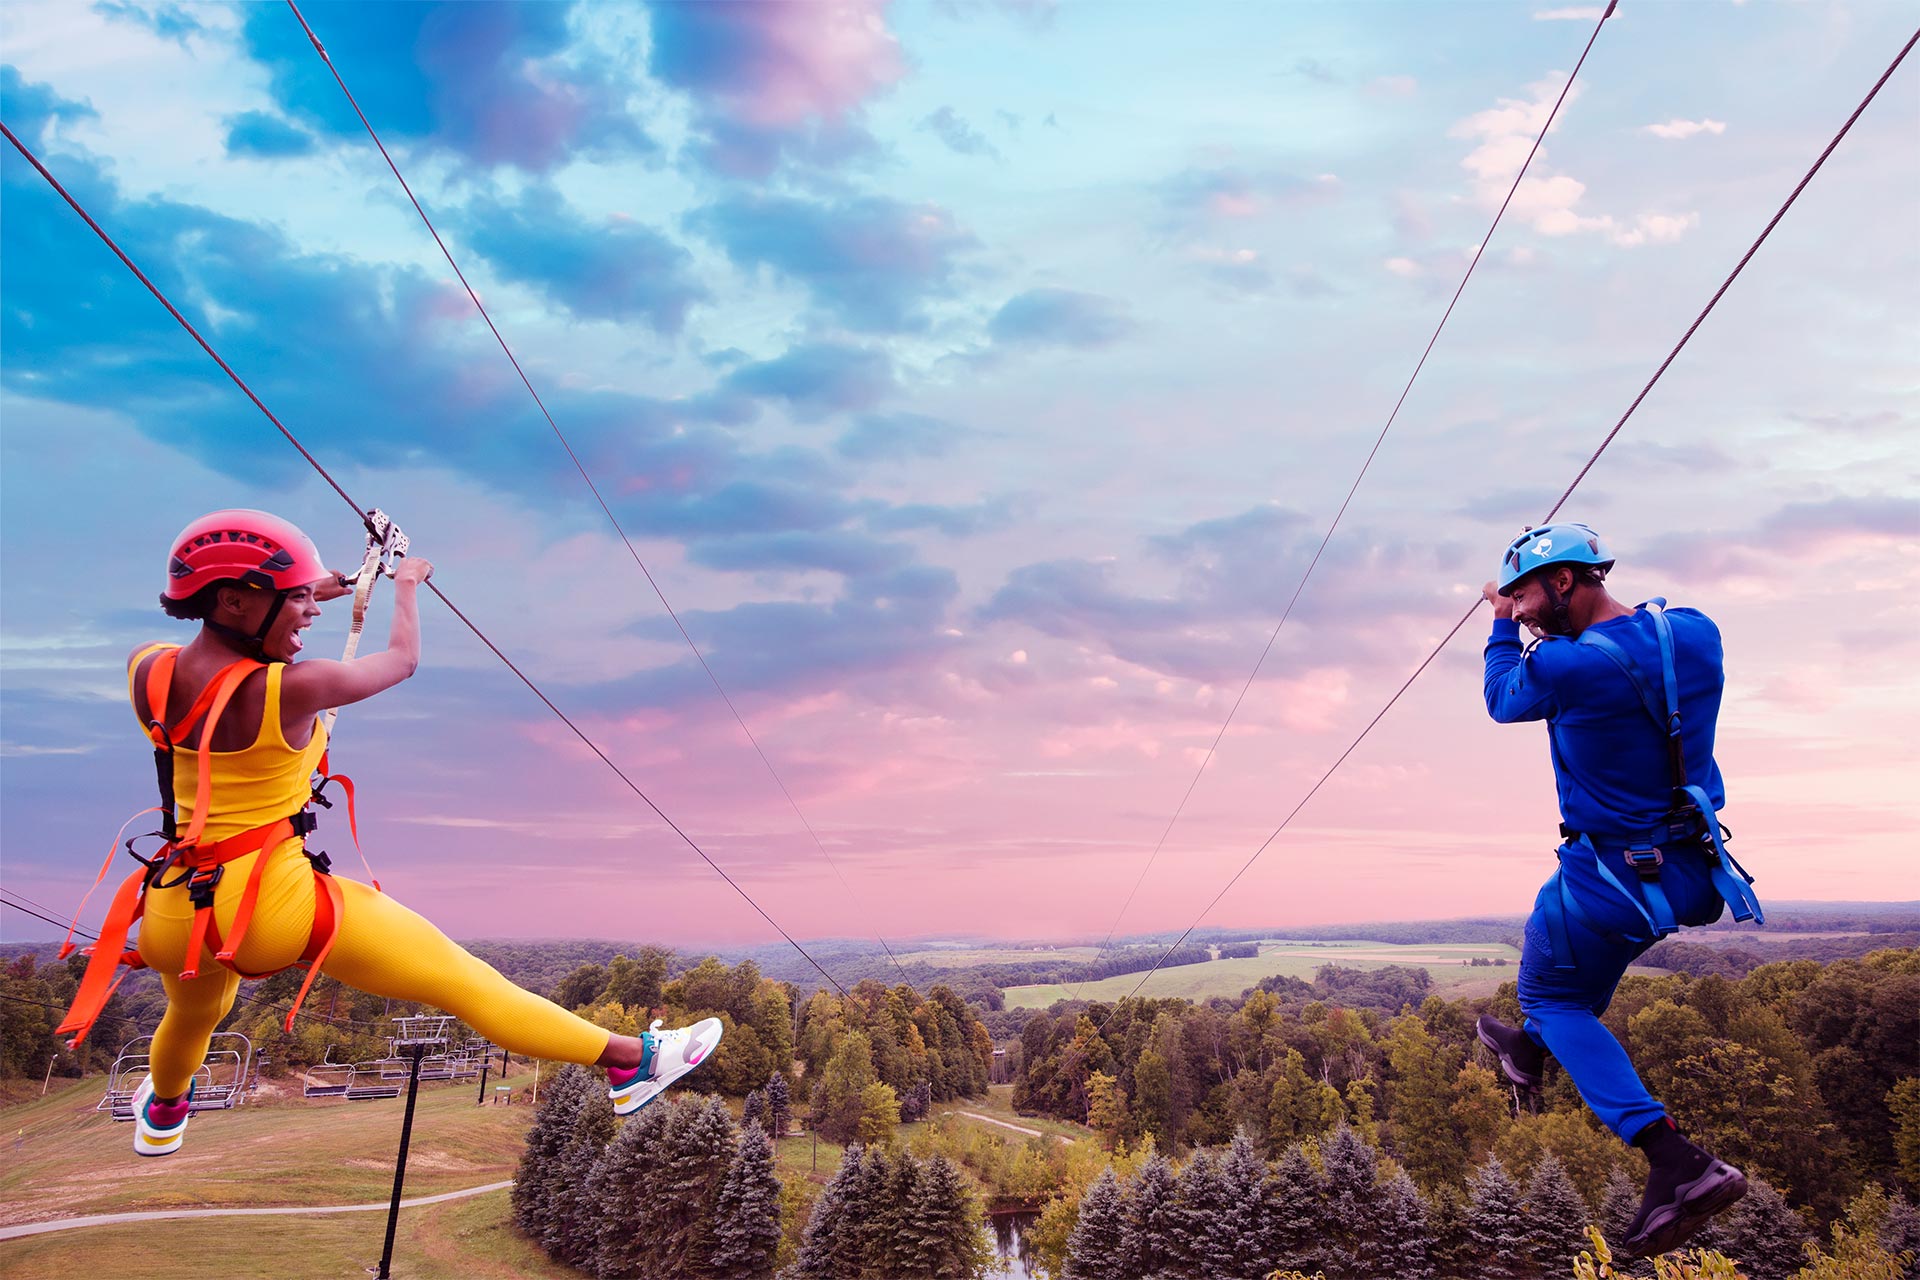 A man and a woman ziplining parallel to one another